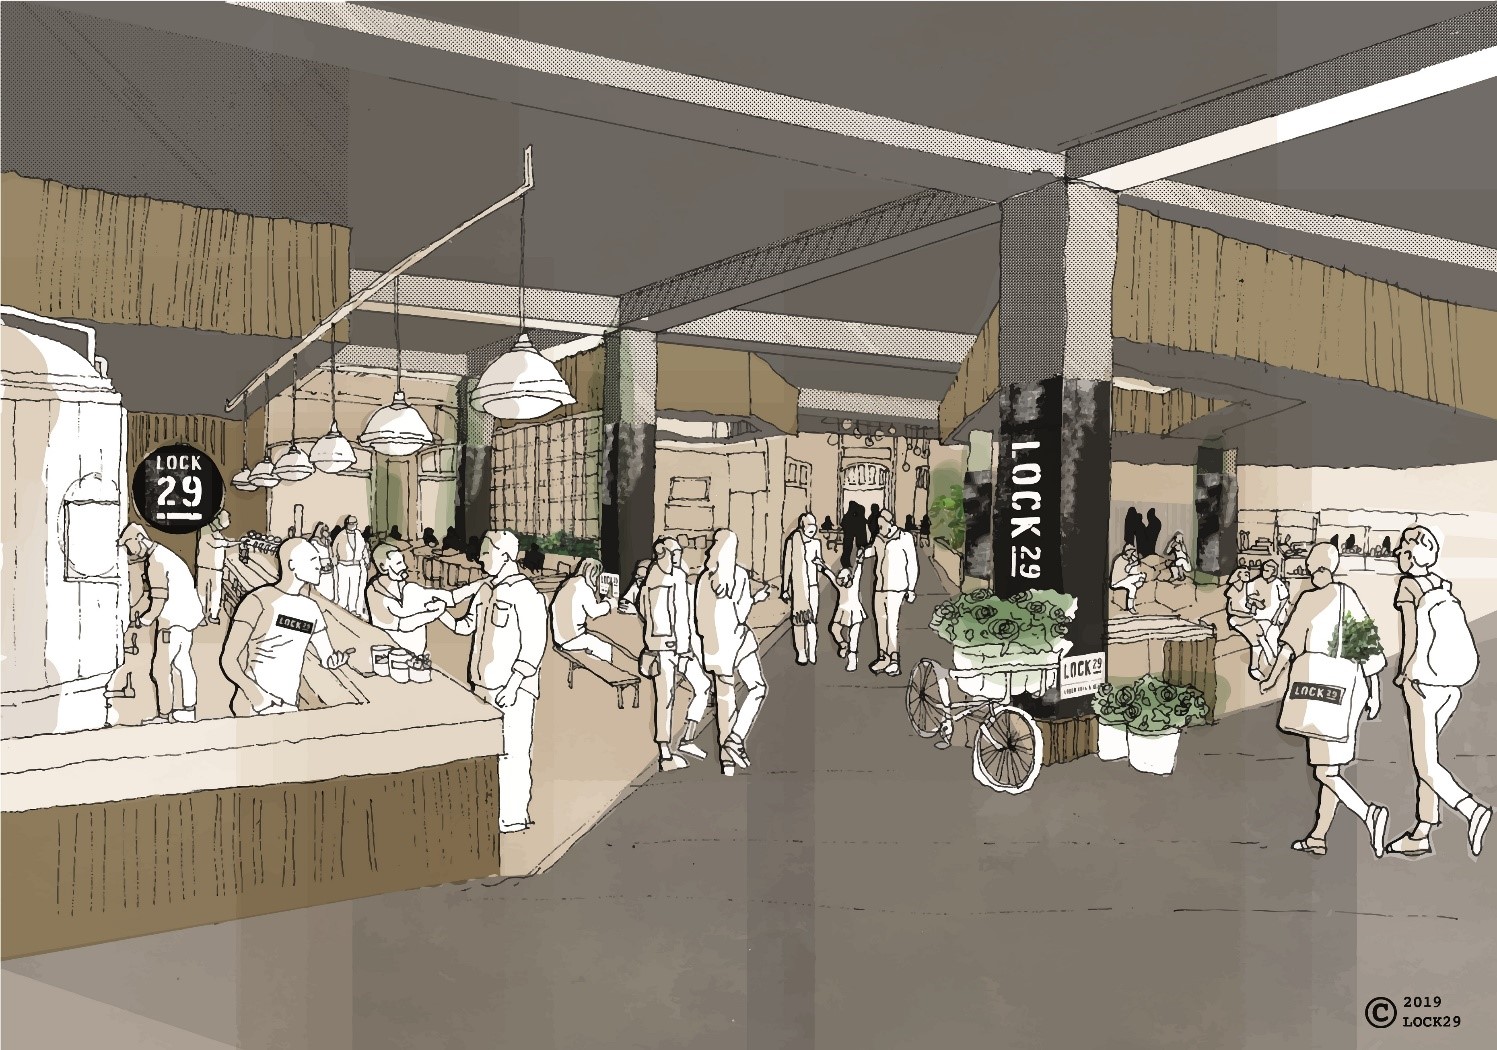 Revolutionary new food and leisure development announced at Castle Quay, Banbury